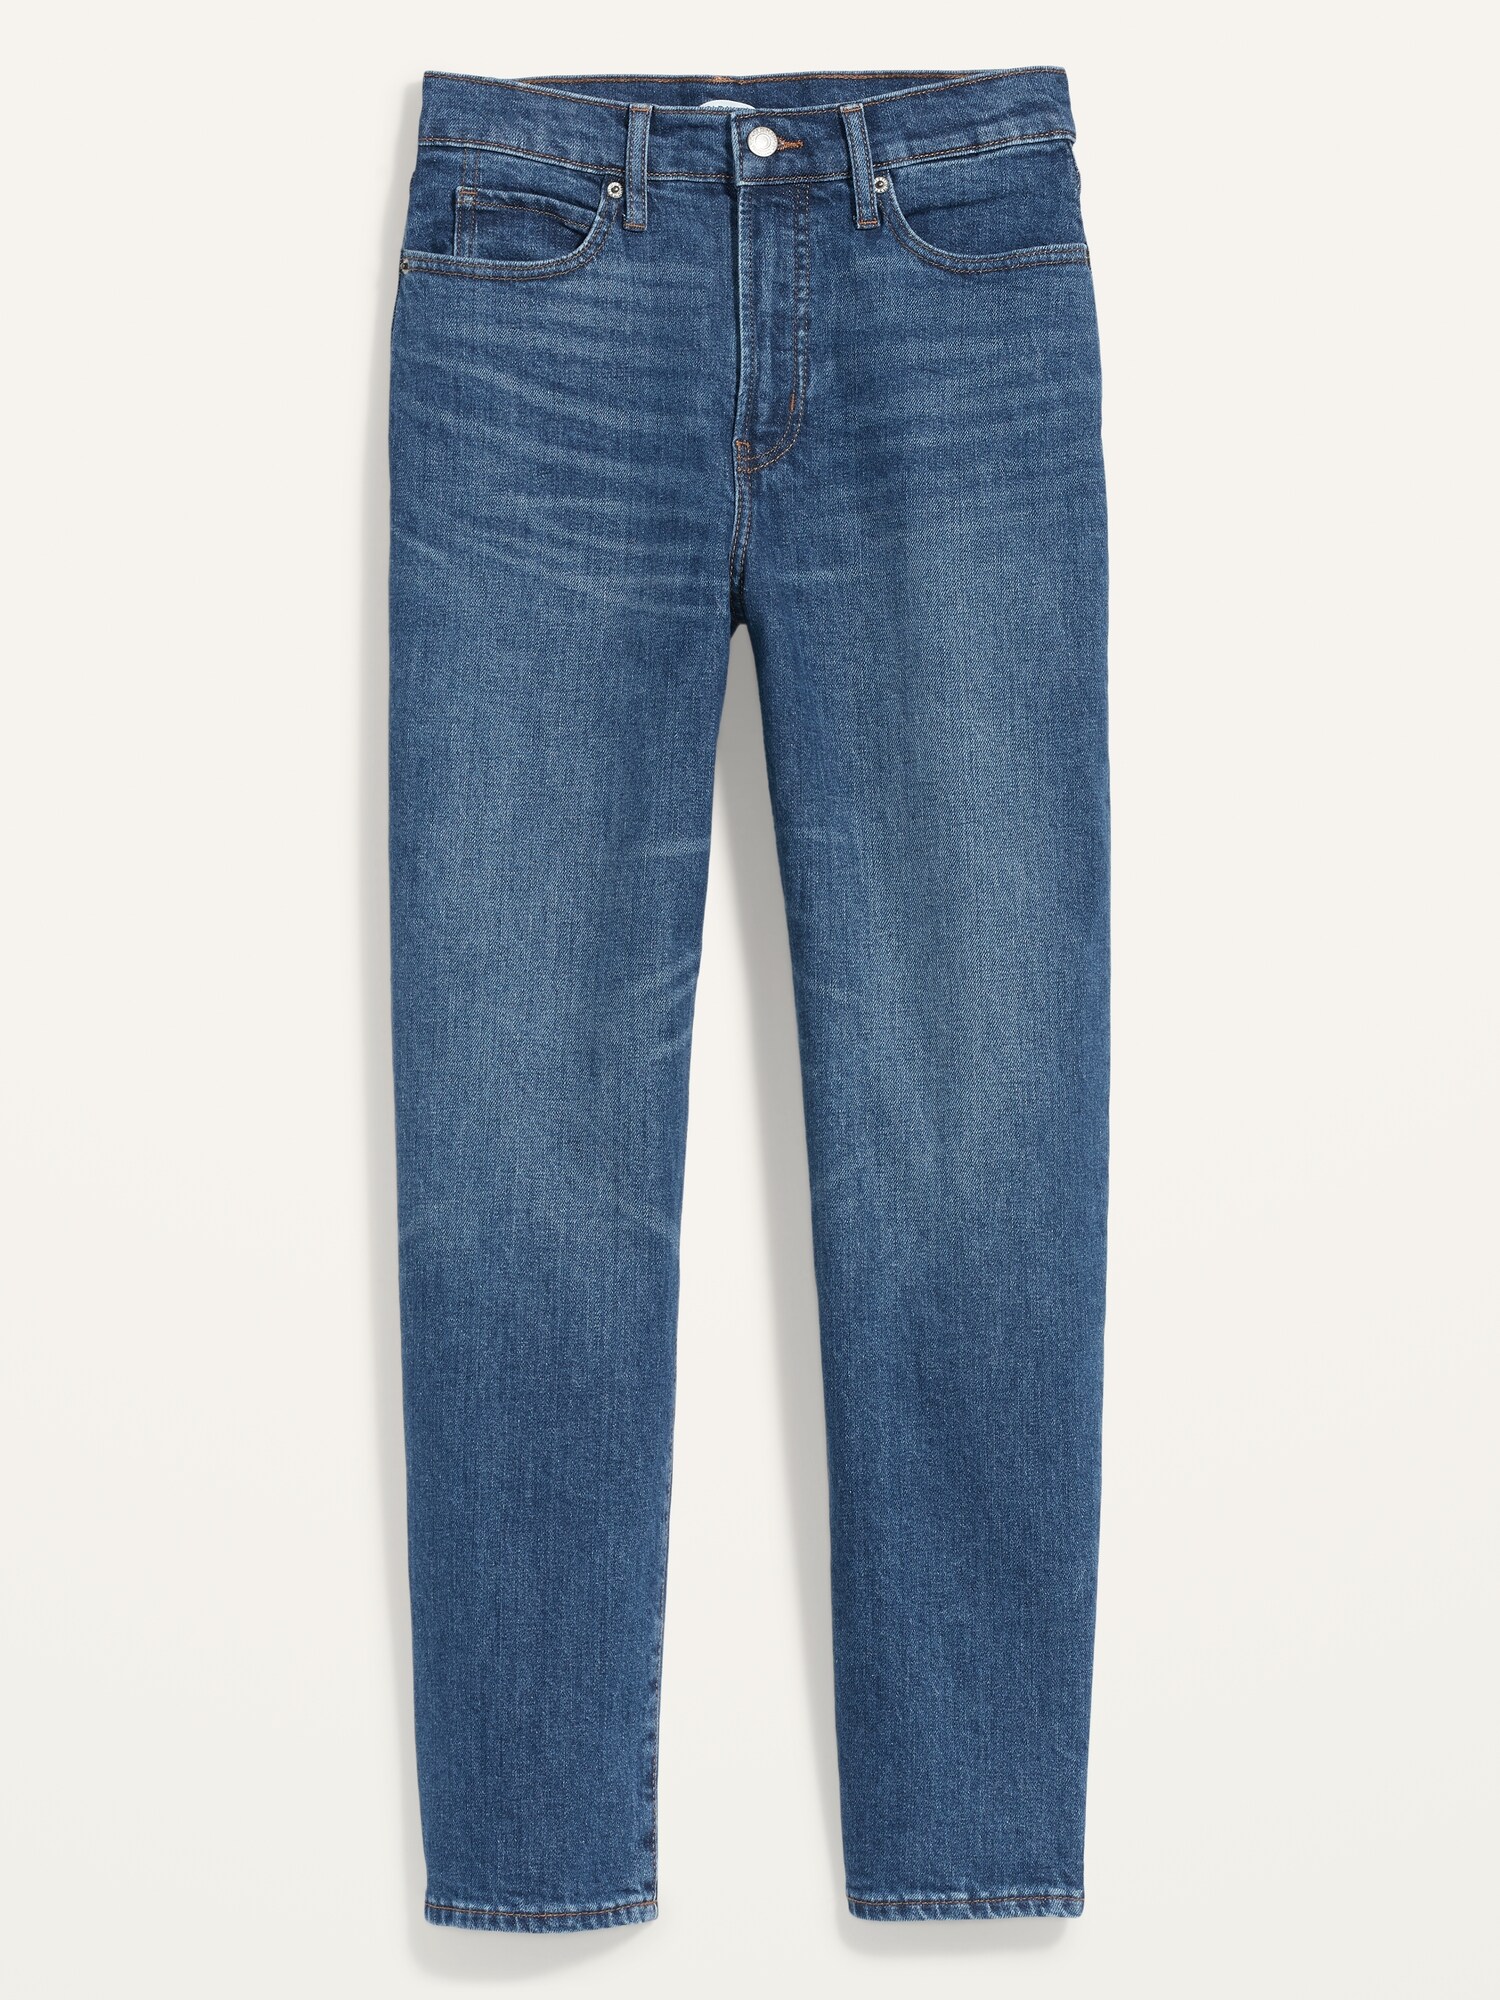 wrangler performance series relaxed fit jeans